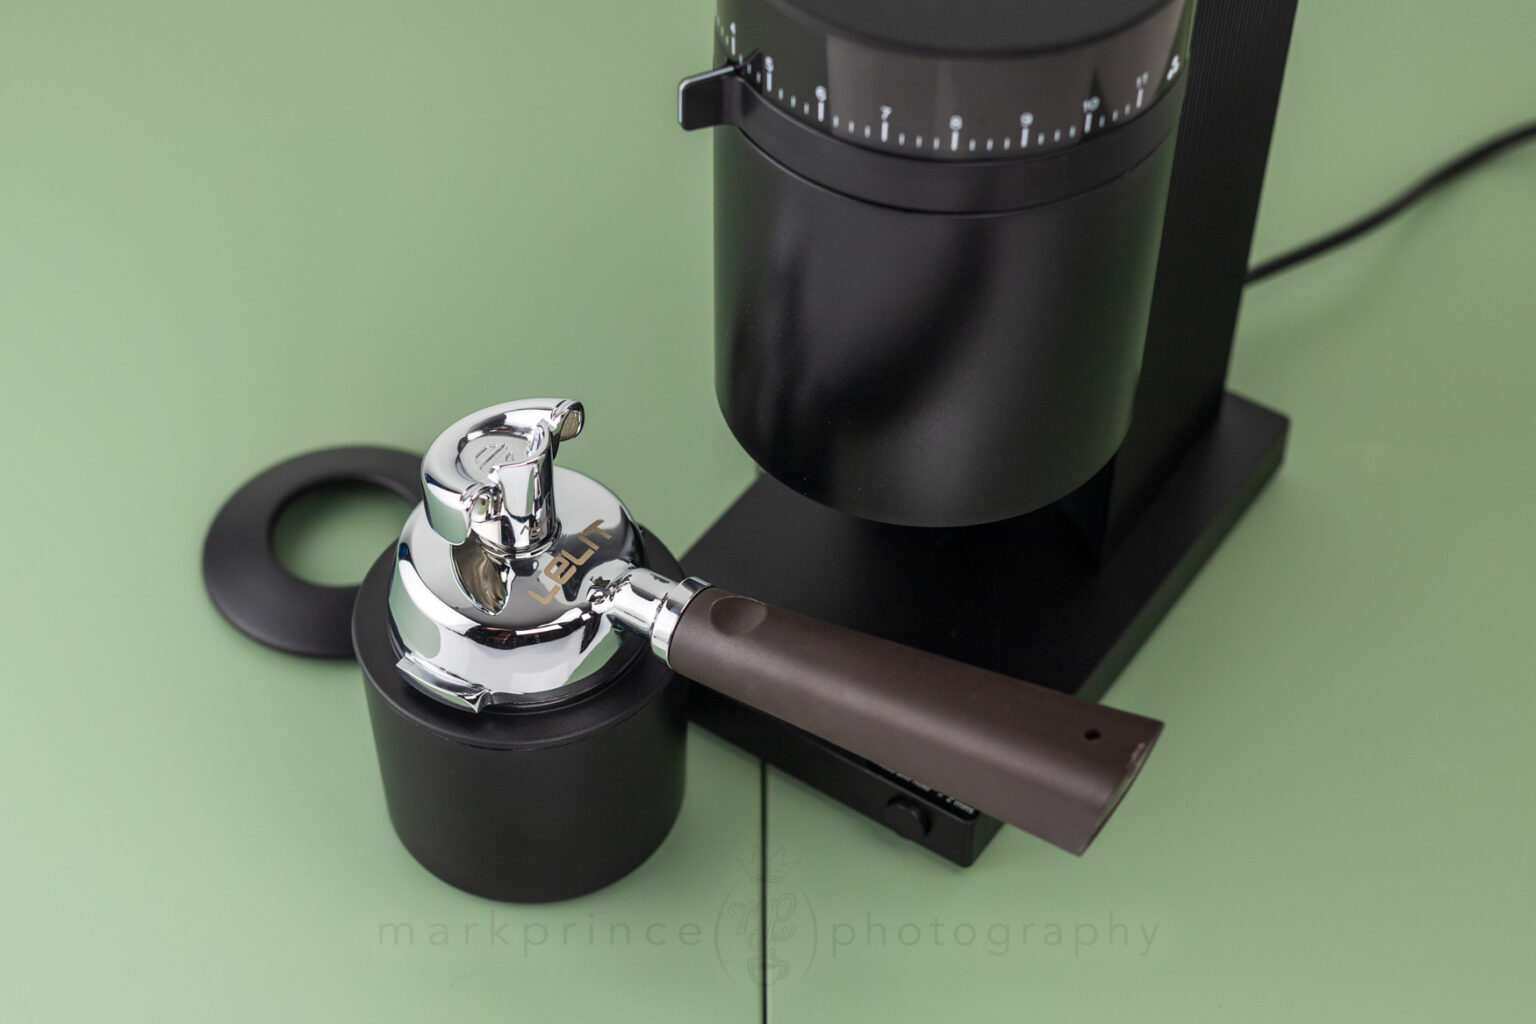 The bin, showing how a commercial 58mm portafilter sits on top.